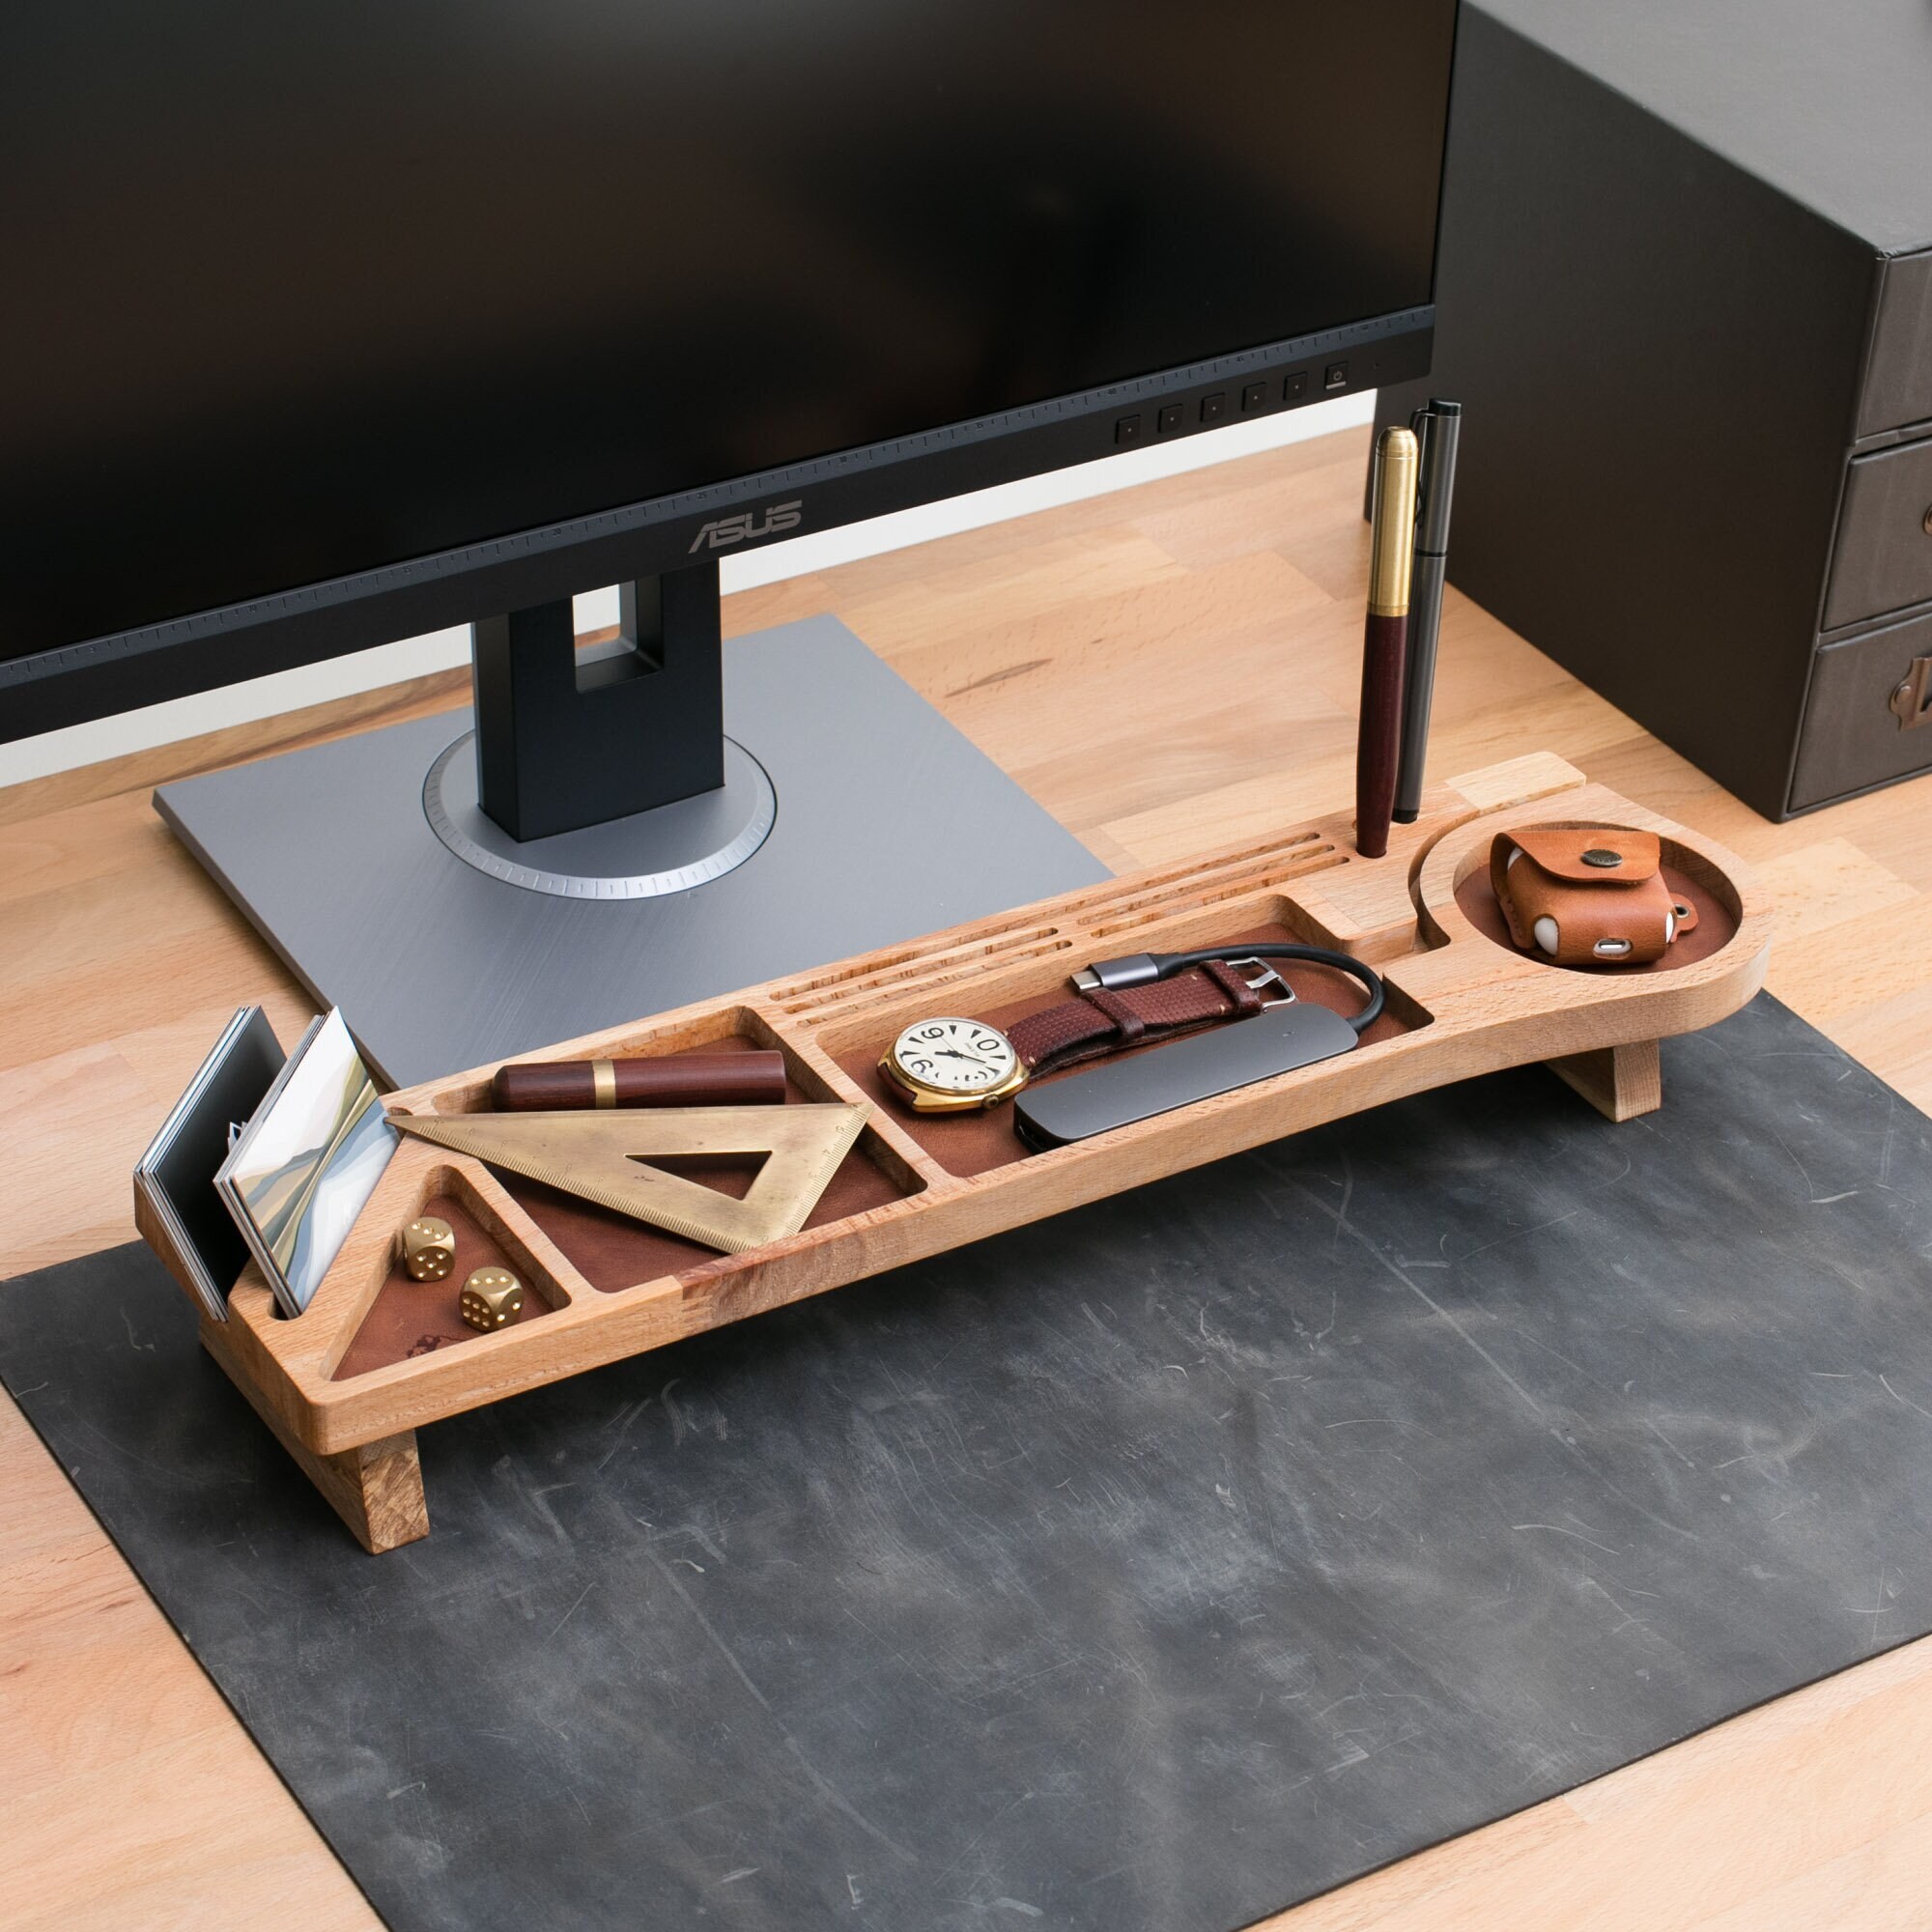 Monitor Stand with Desk Organizer